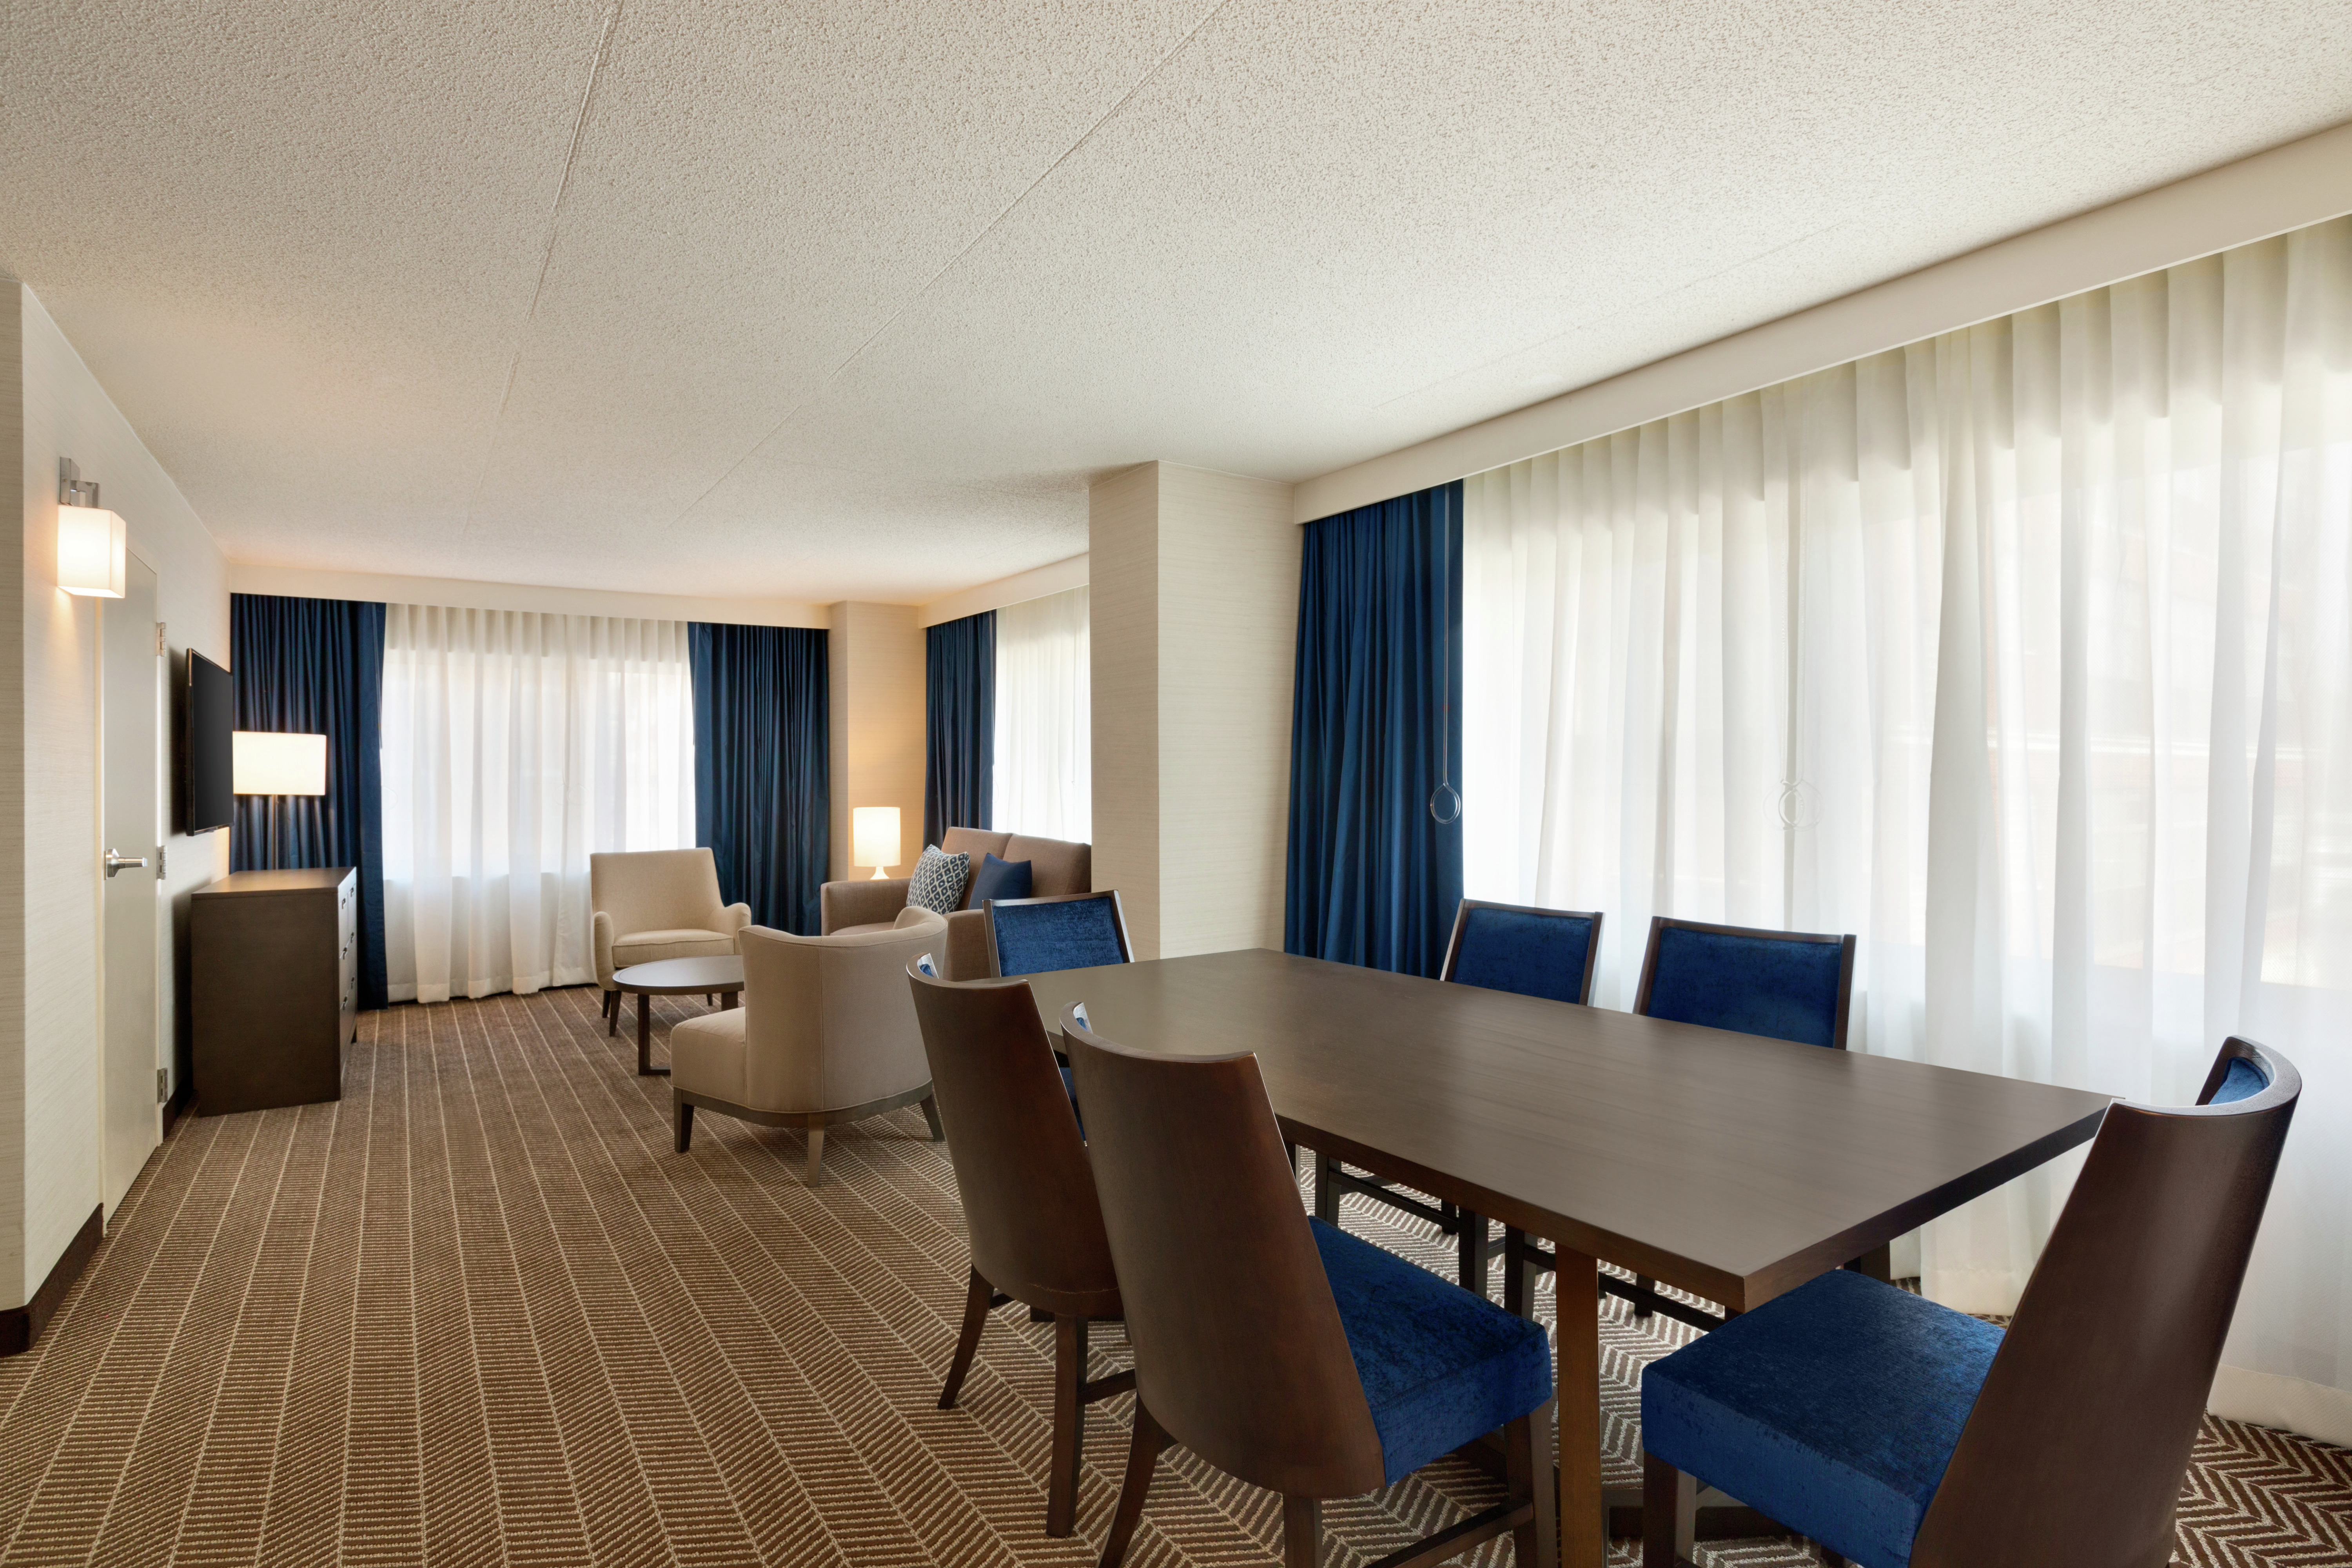 Executive Suite Living Area with Meeting Table and Chairs